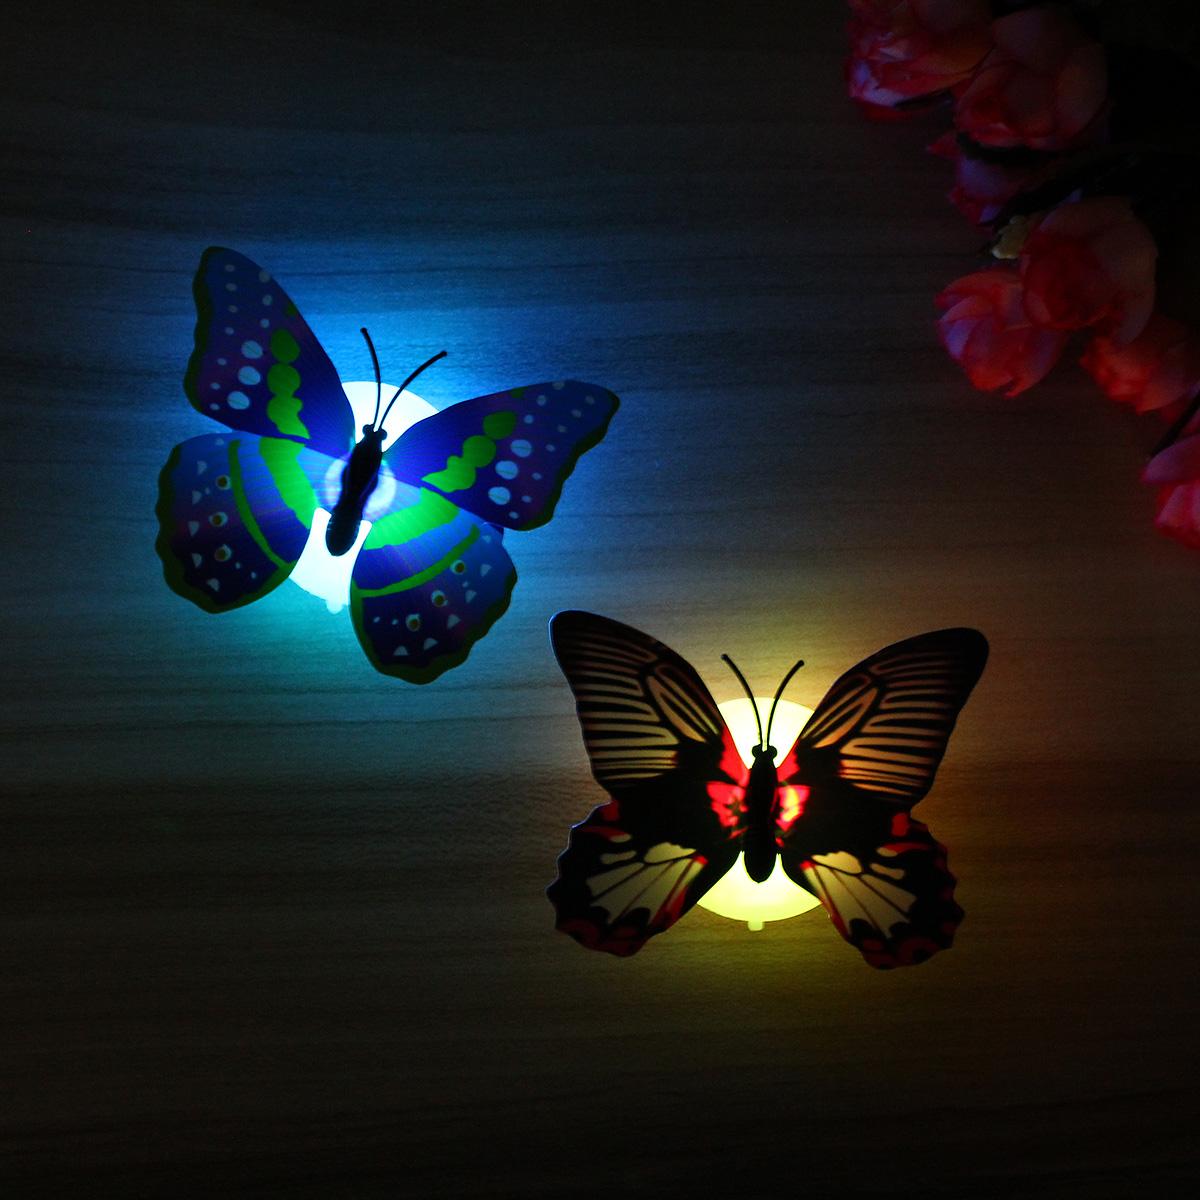 Pack of 6 LED Butterfly Glow In The Dark Night Light